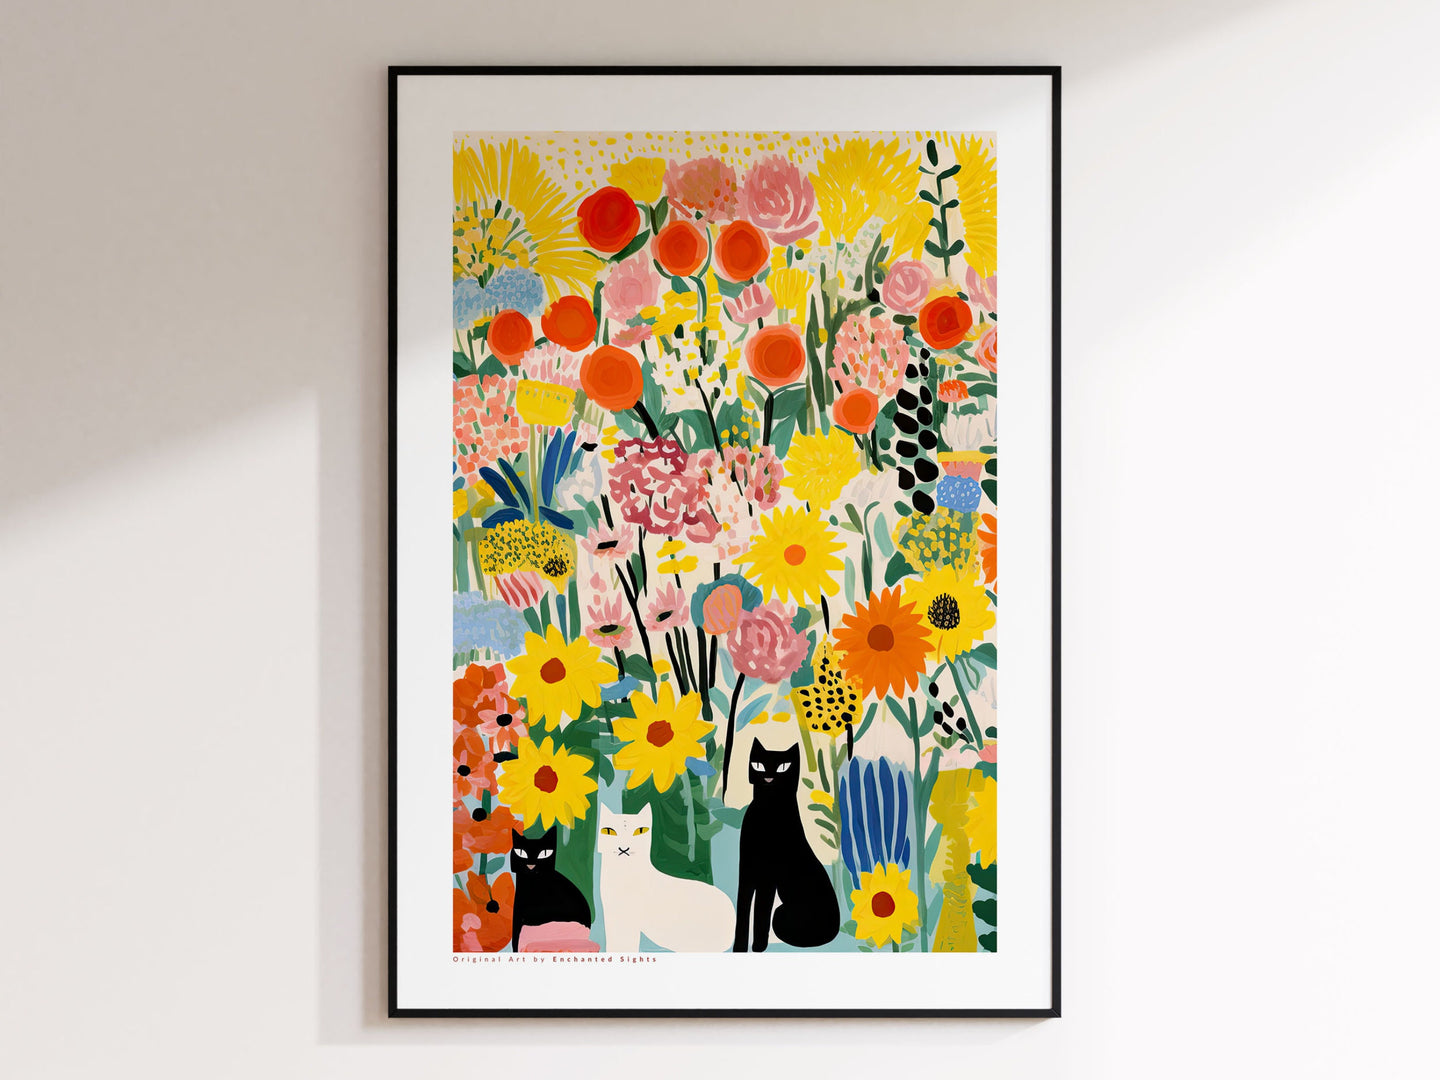 Cat in Garden, Flowers and Cats, Yellow Wall Art, Flower Art Print, Cat Art Print, Cat Illustration, Floral Wall Decor, Gifts for Cat Lovers